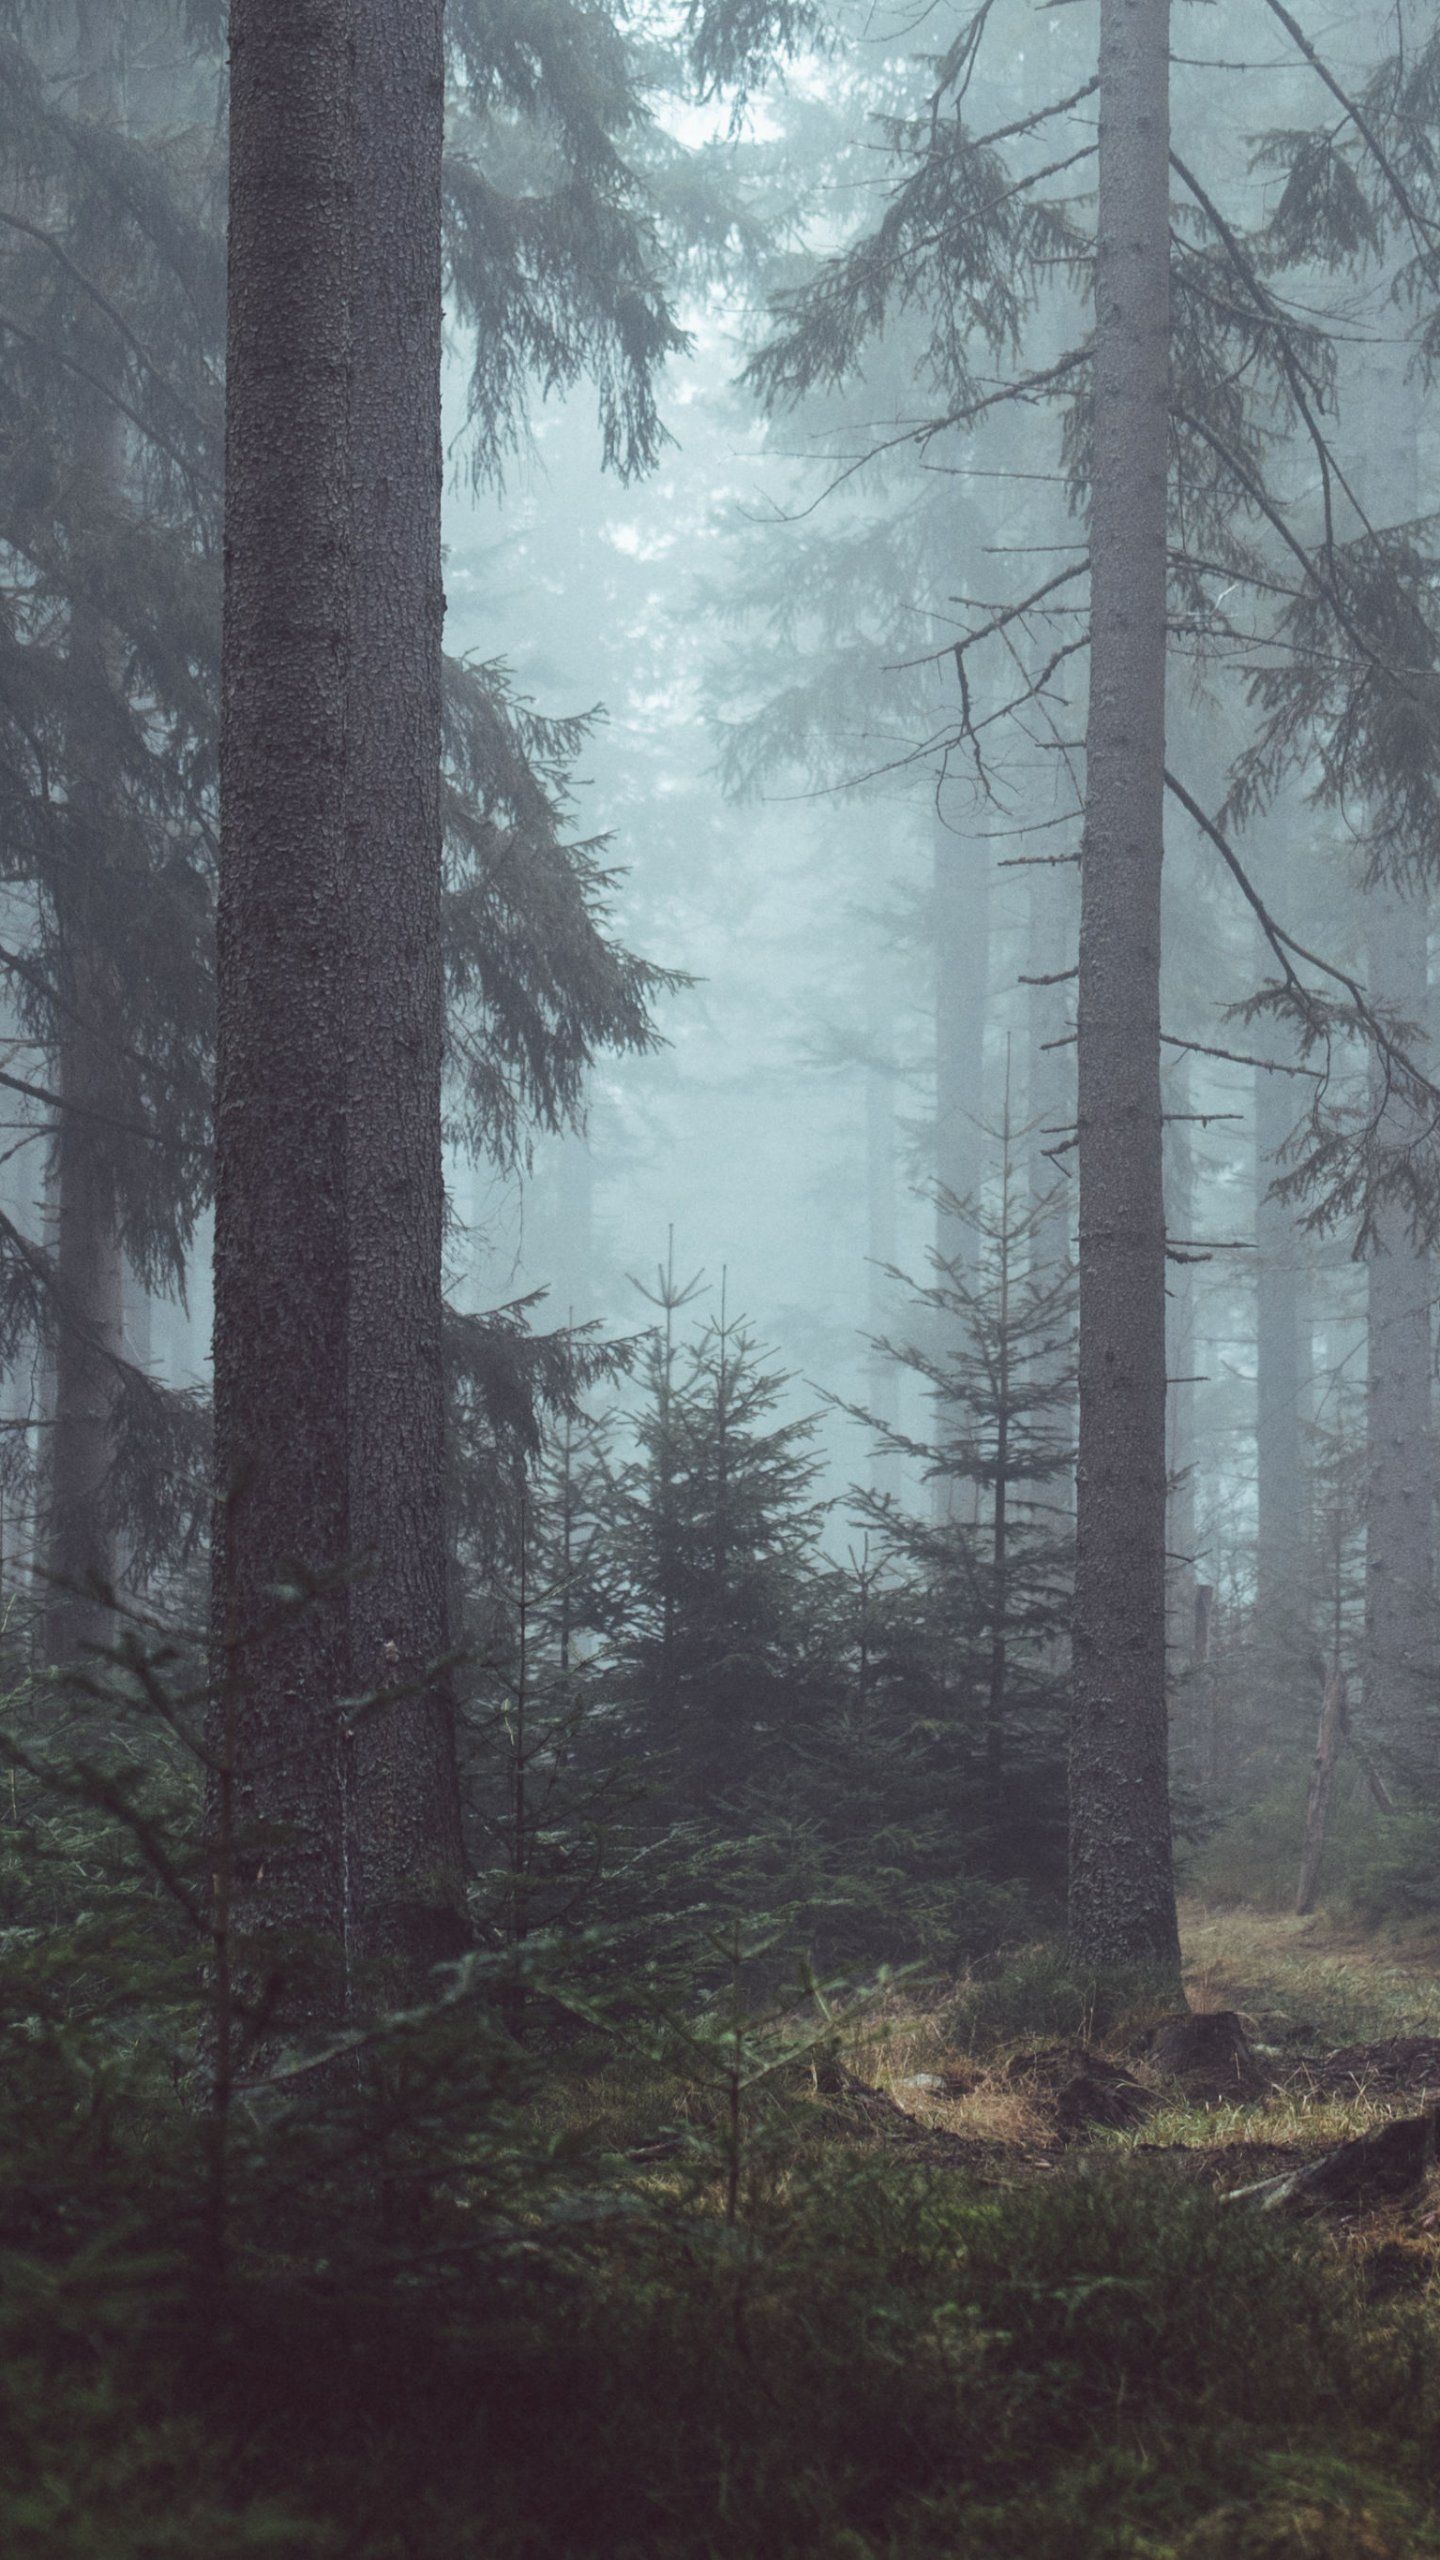 A man walking through the woods with his dog - Foggy forest